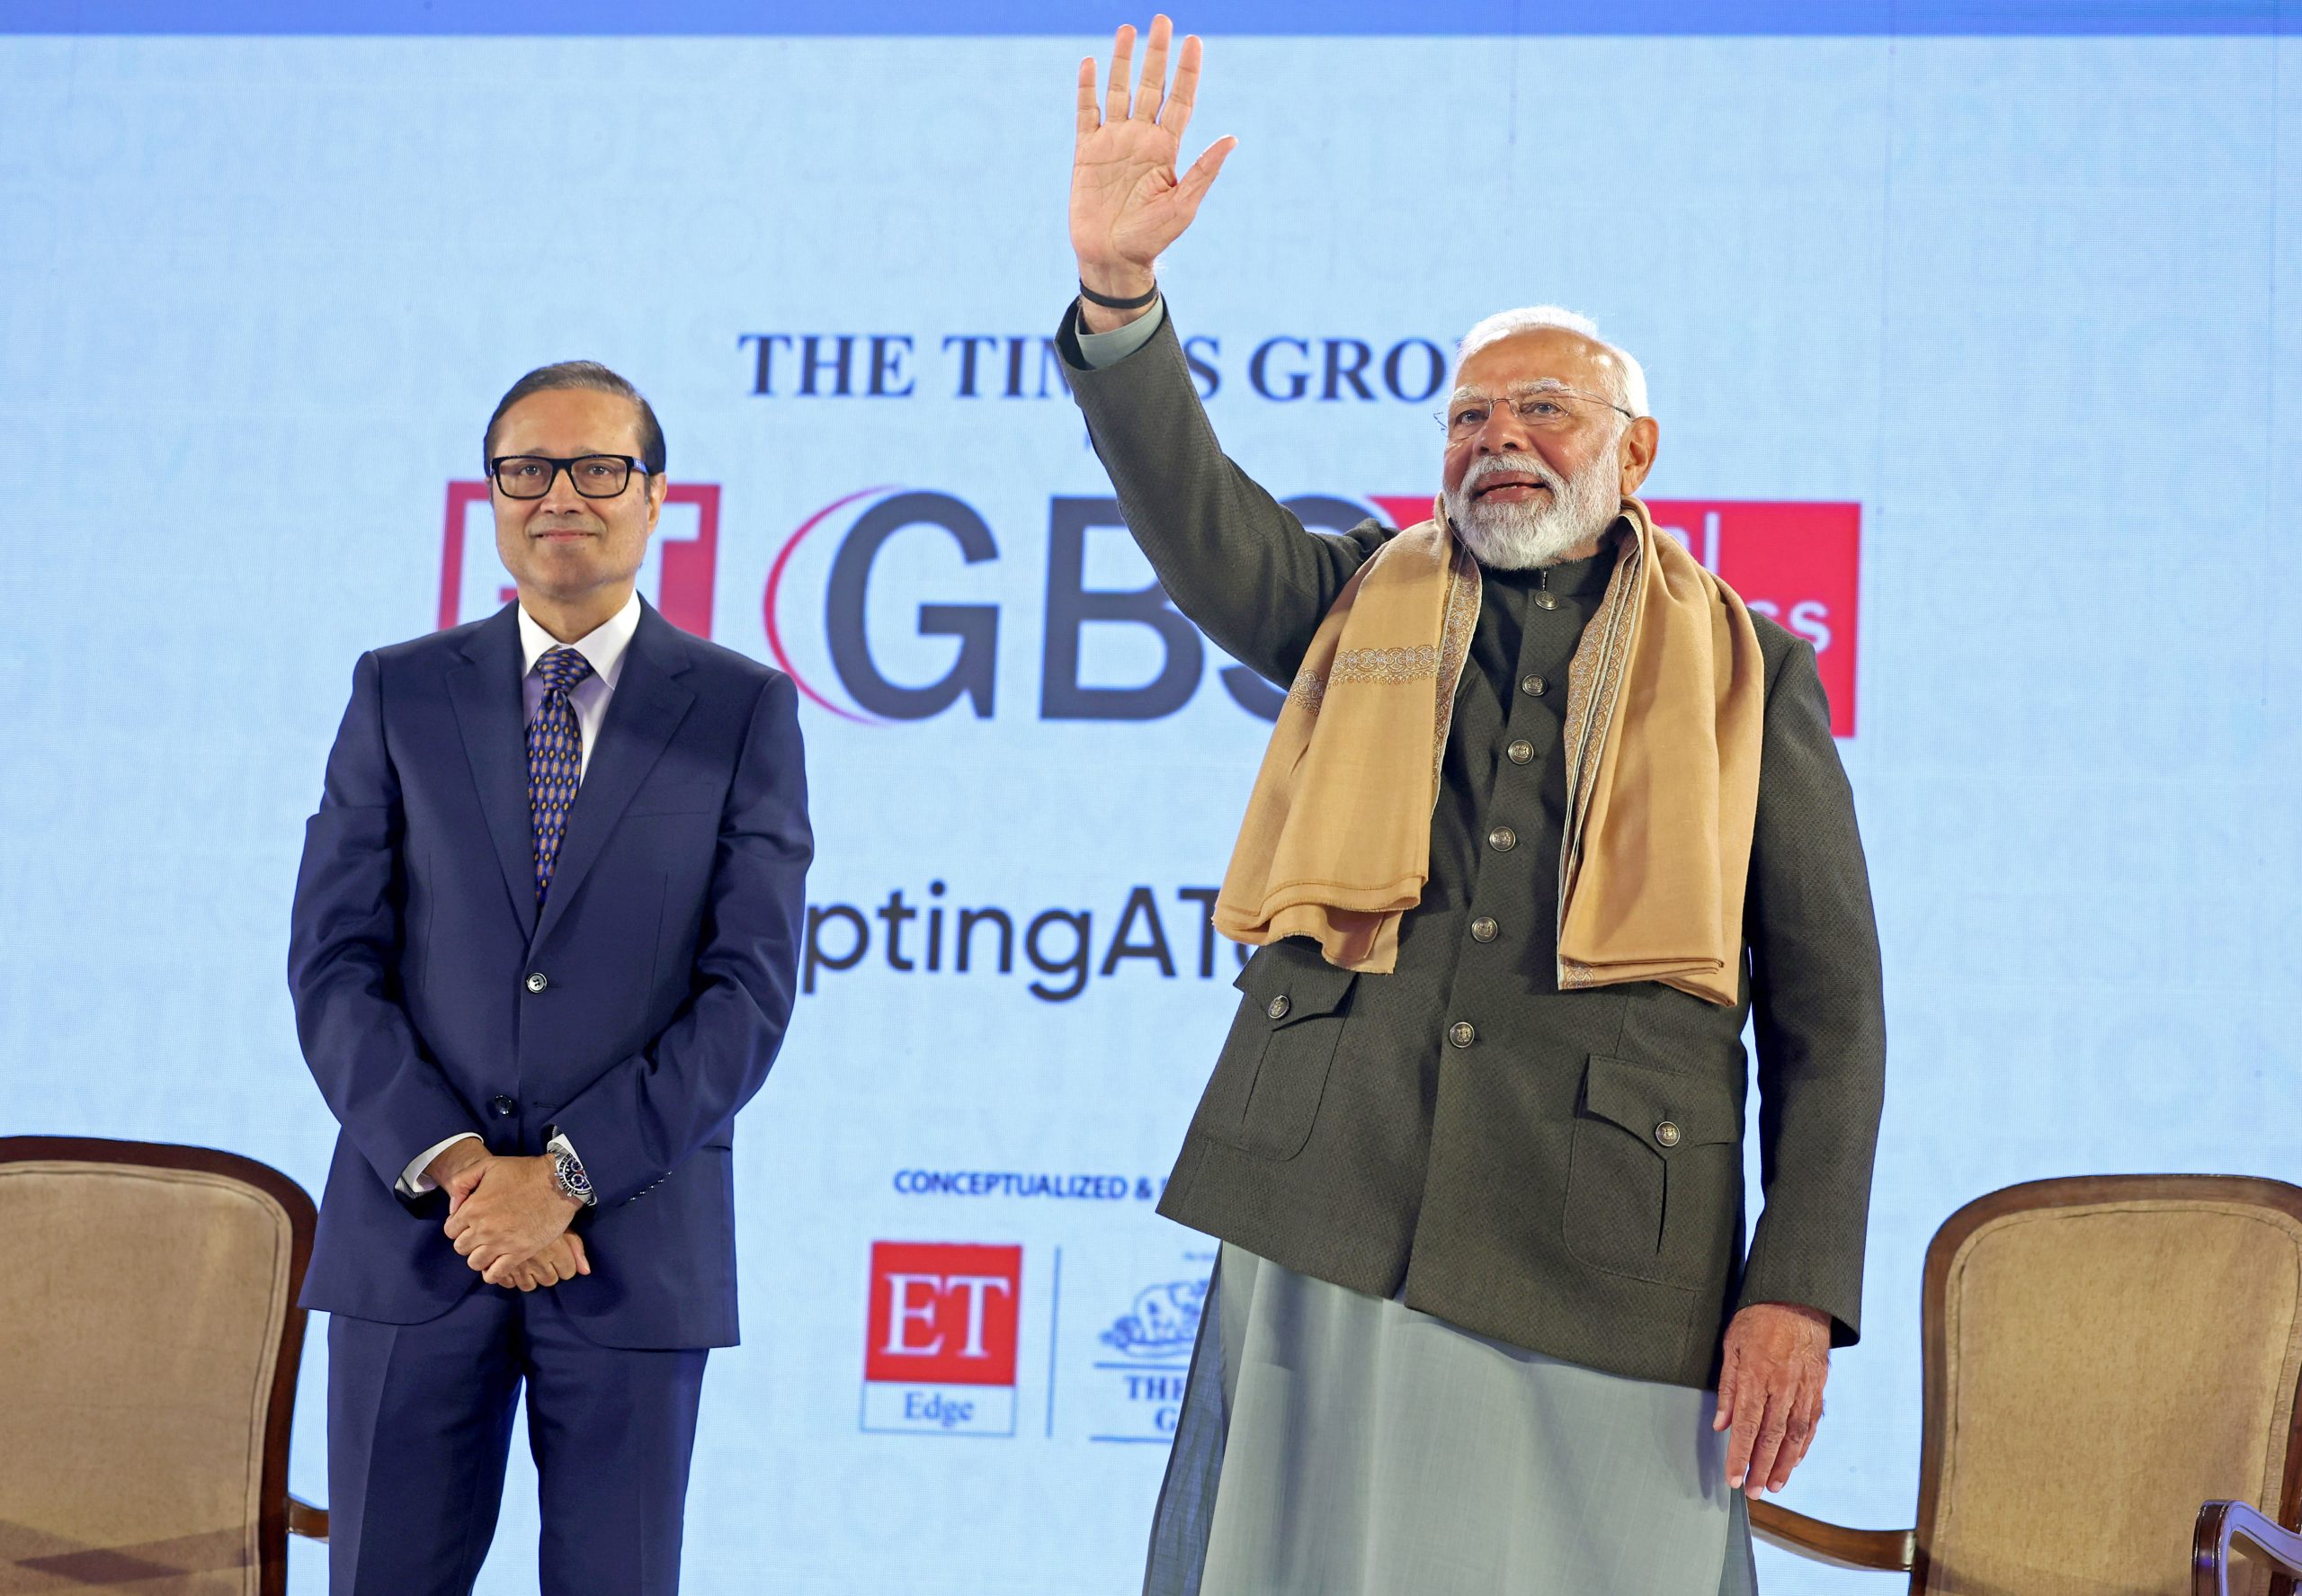 New Delhi: Prime Minister Narendra Modi and Times Group MD Vineet Jain during the Global Business Summit, at the Taj Hotel in New Delhi on Friday. (ANI Photo)